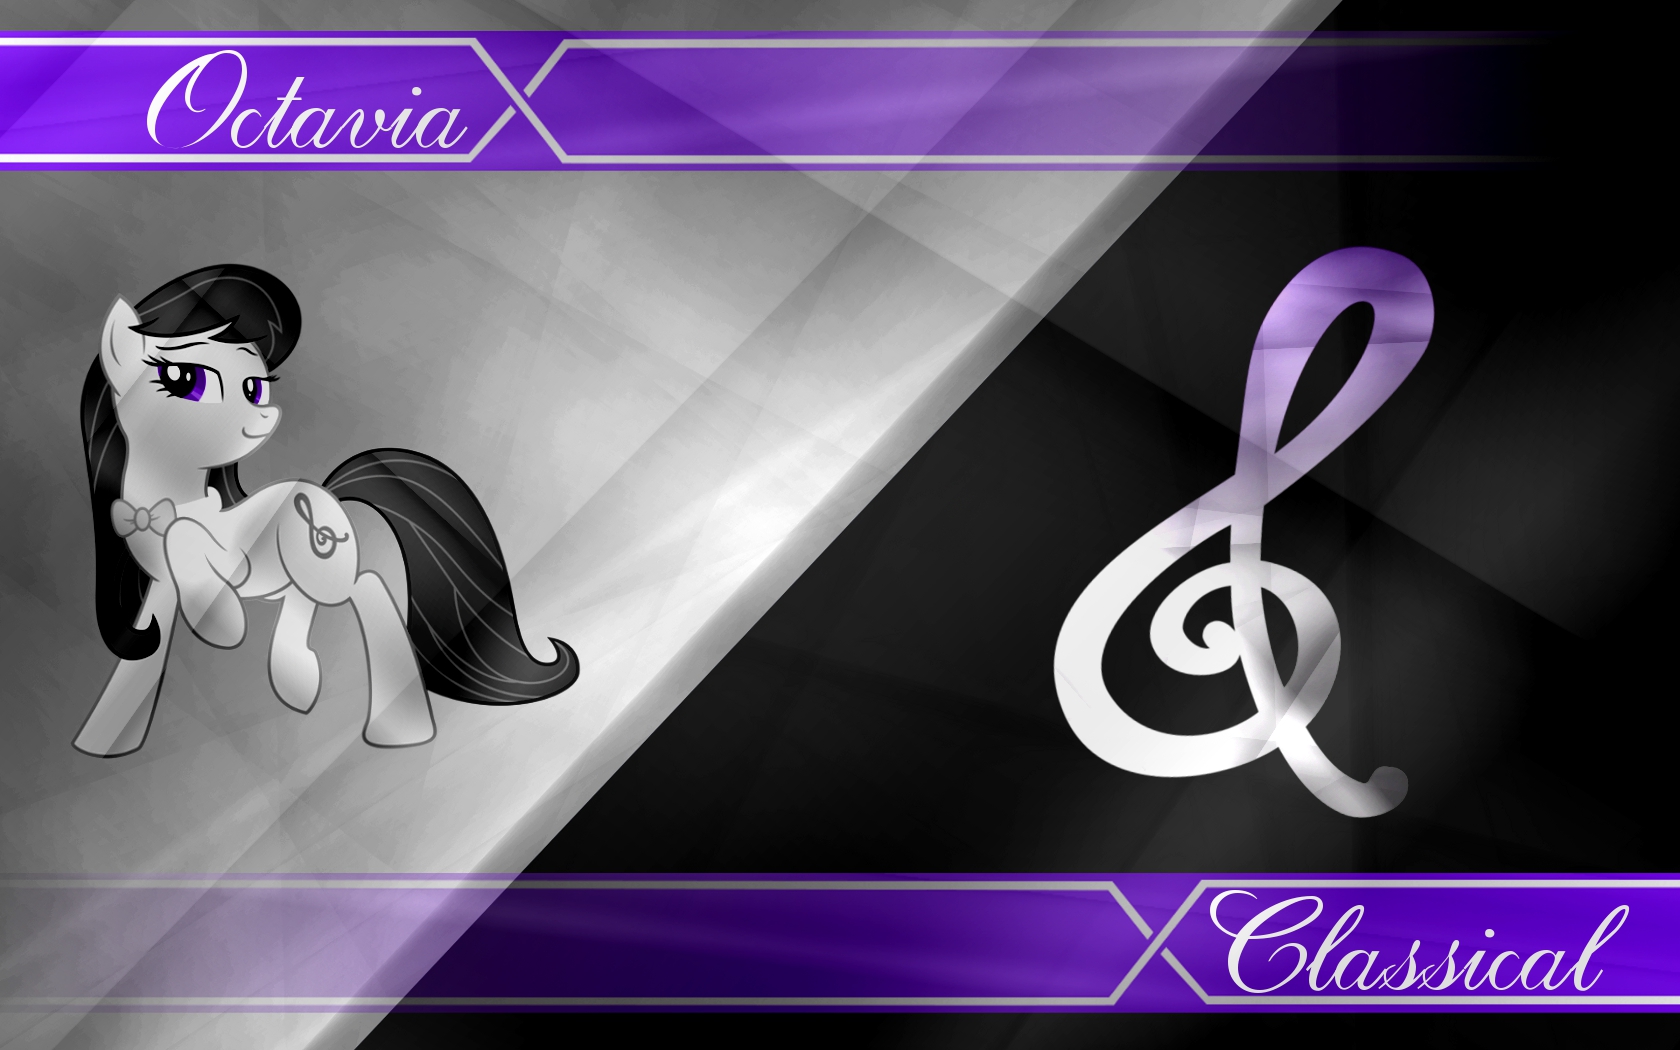 Octavia Classical by Helsoul3